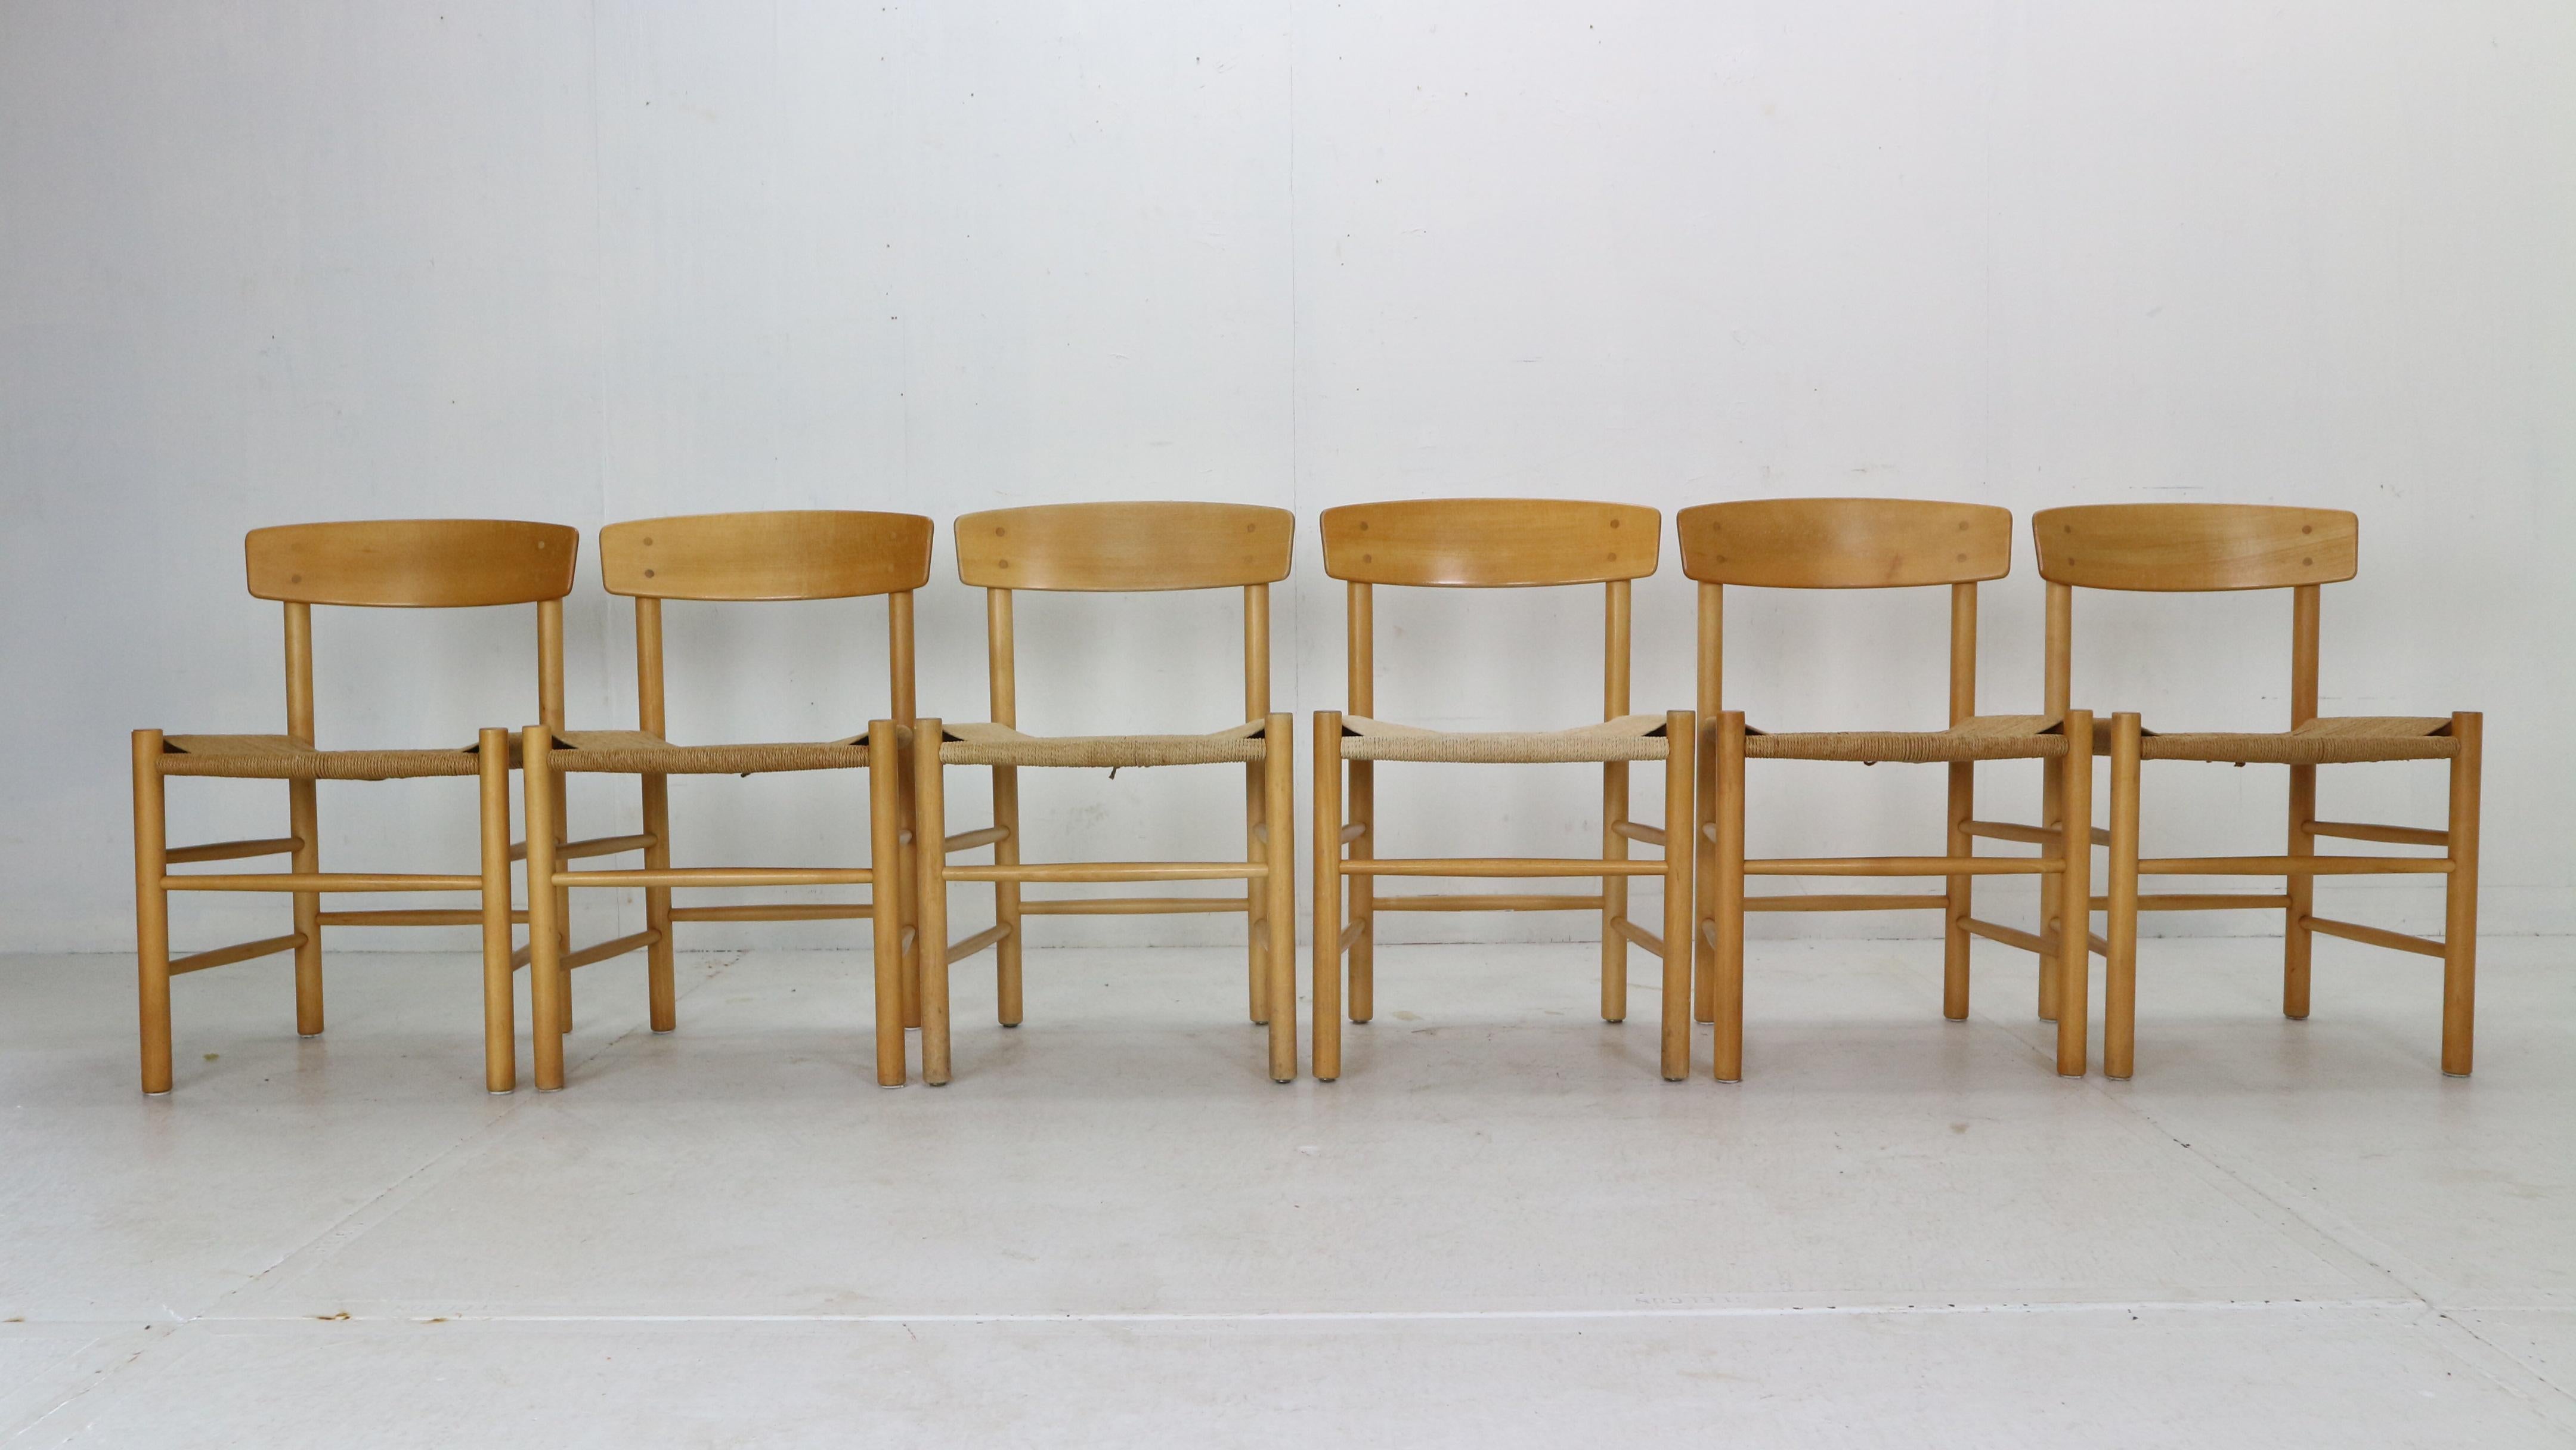 Scandinavian modern period set of 6 stunning dining room chairs designed by Børge Mogensen in 1947 for FDB Møbler Danish manufacture.
Due to its different use in private as well as public spaces the chair got called 